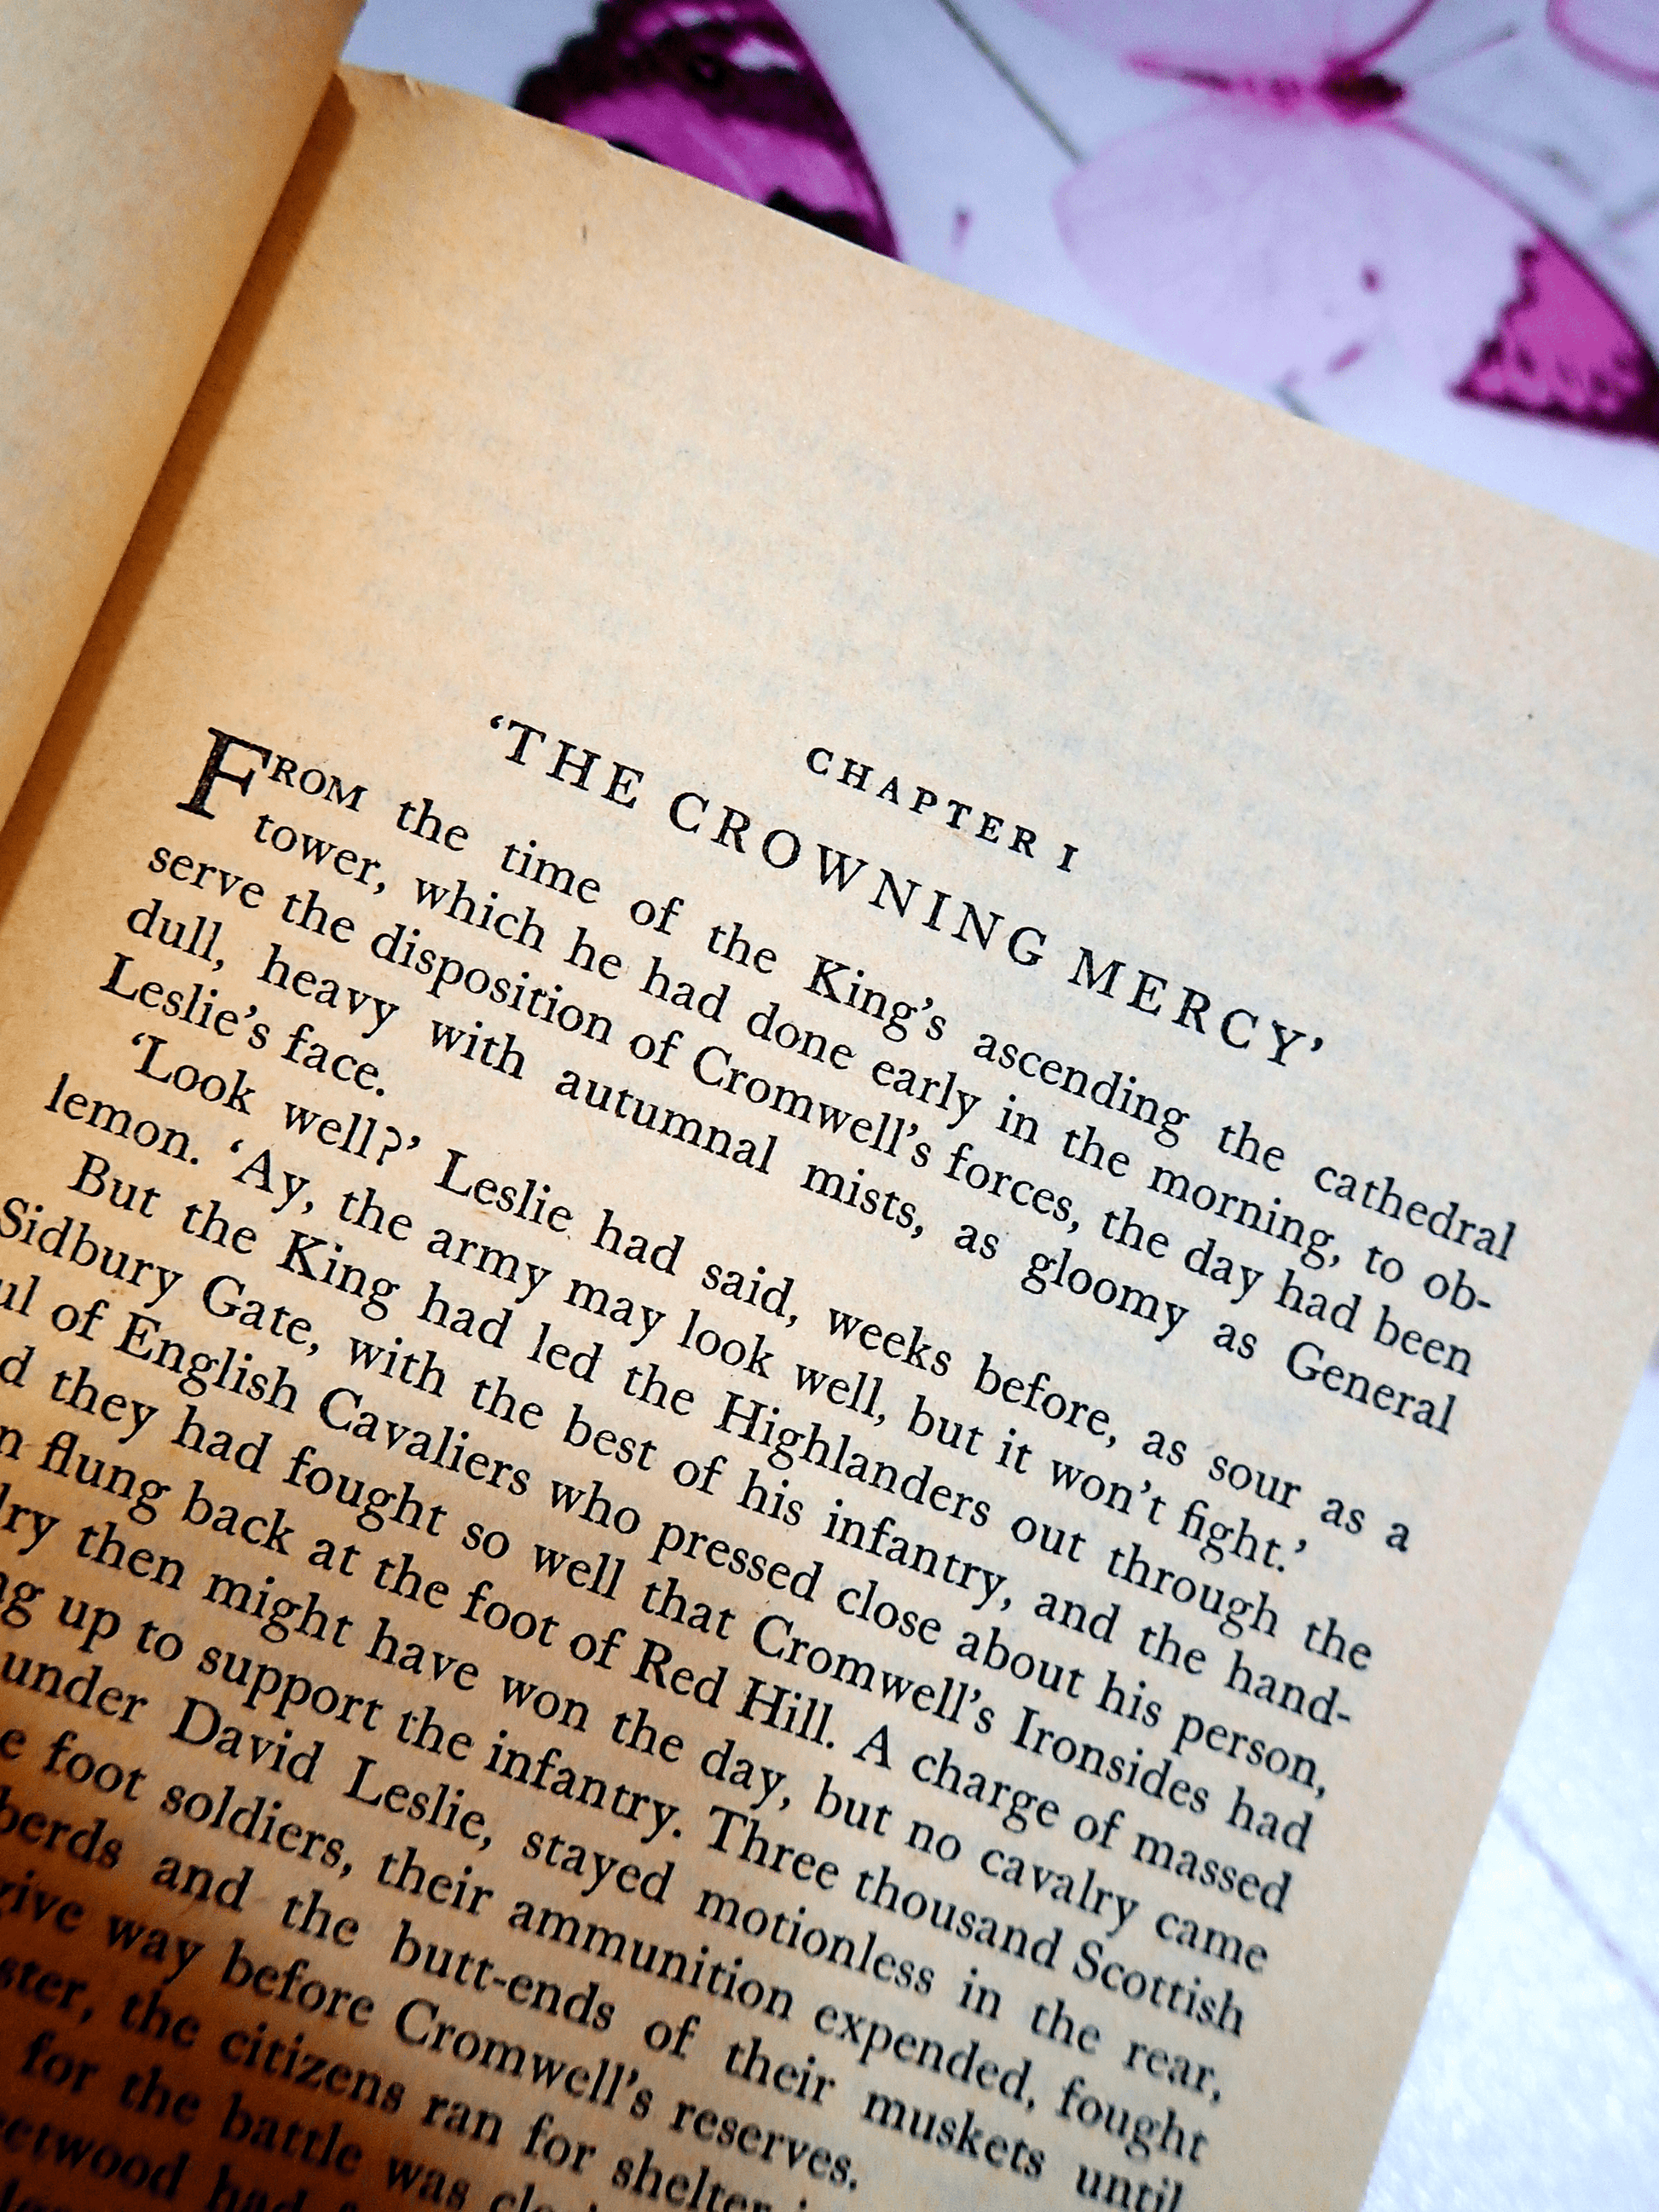 First page of Royal Escape Georgette Heyer Vintage Pan 1960's showing text: The crowning mercy